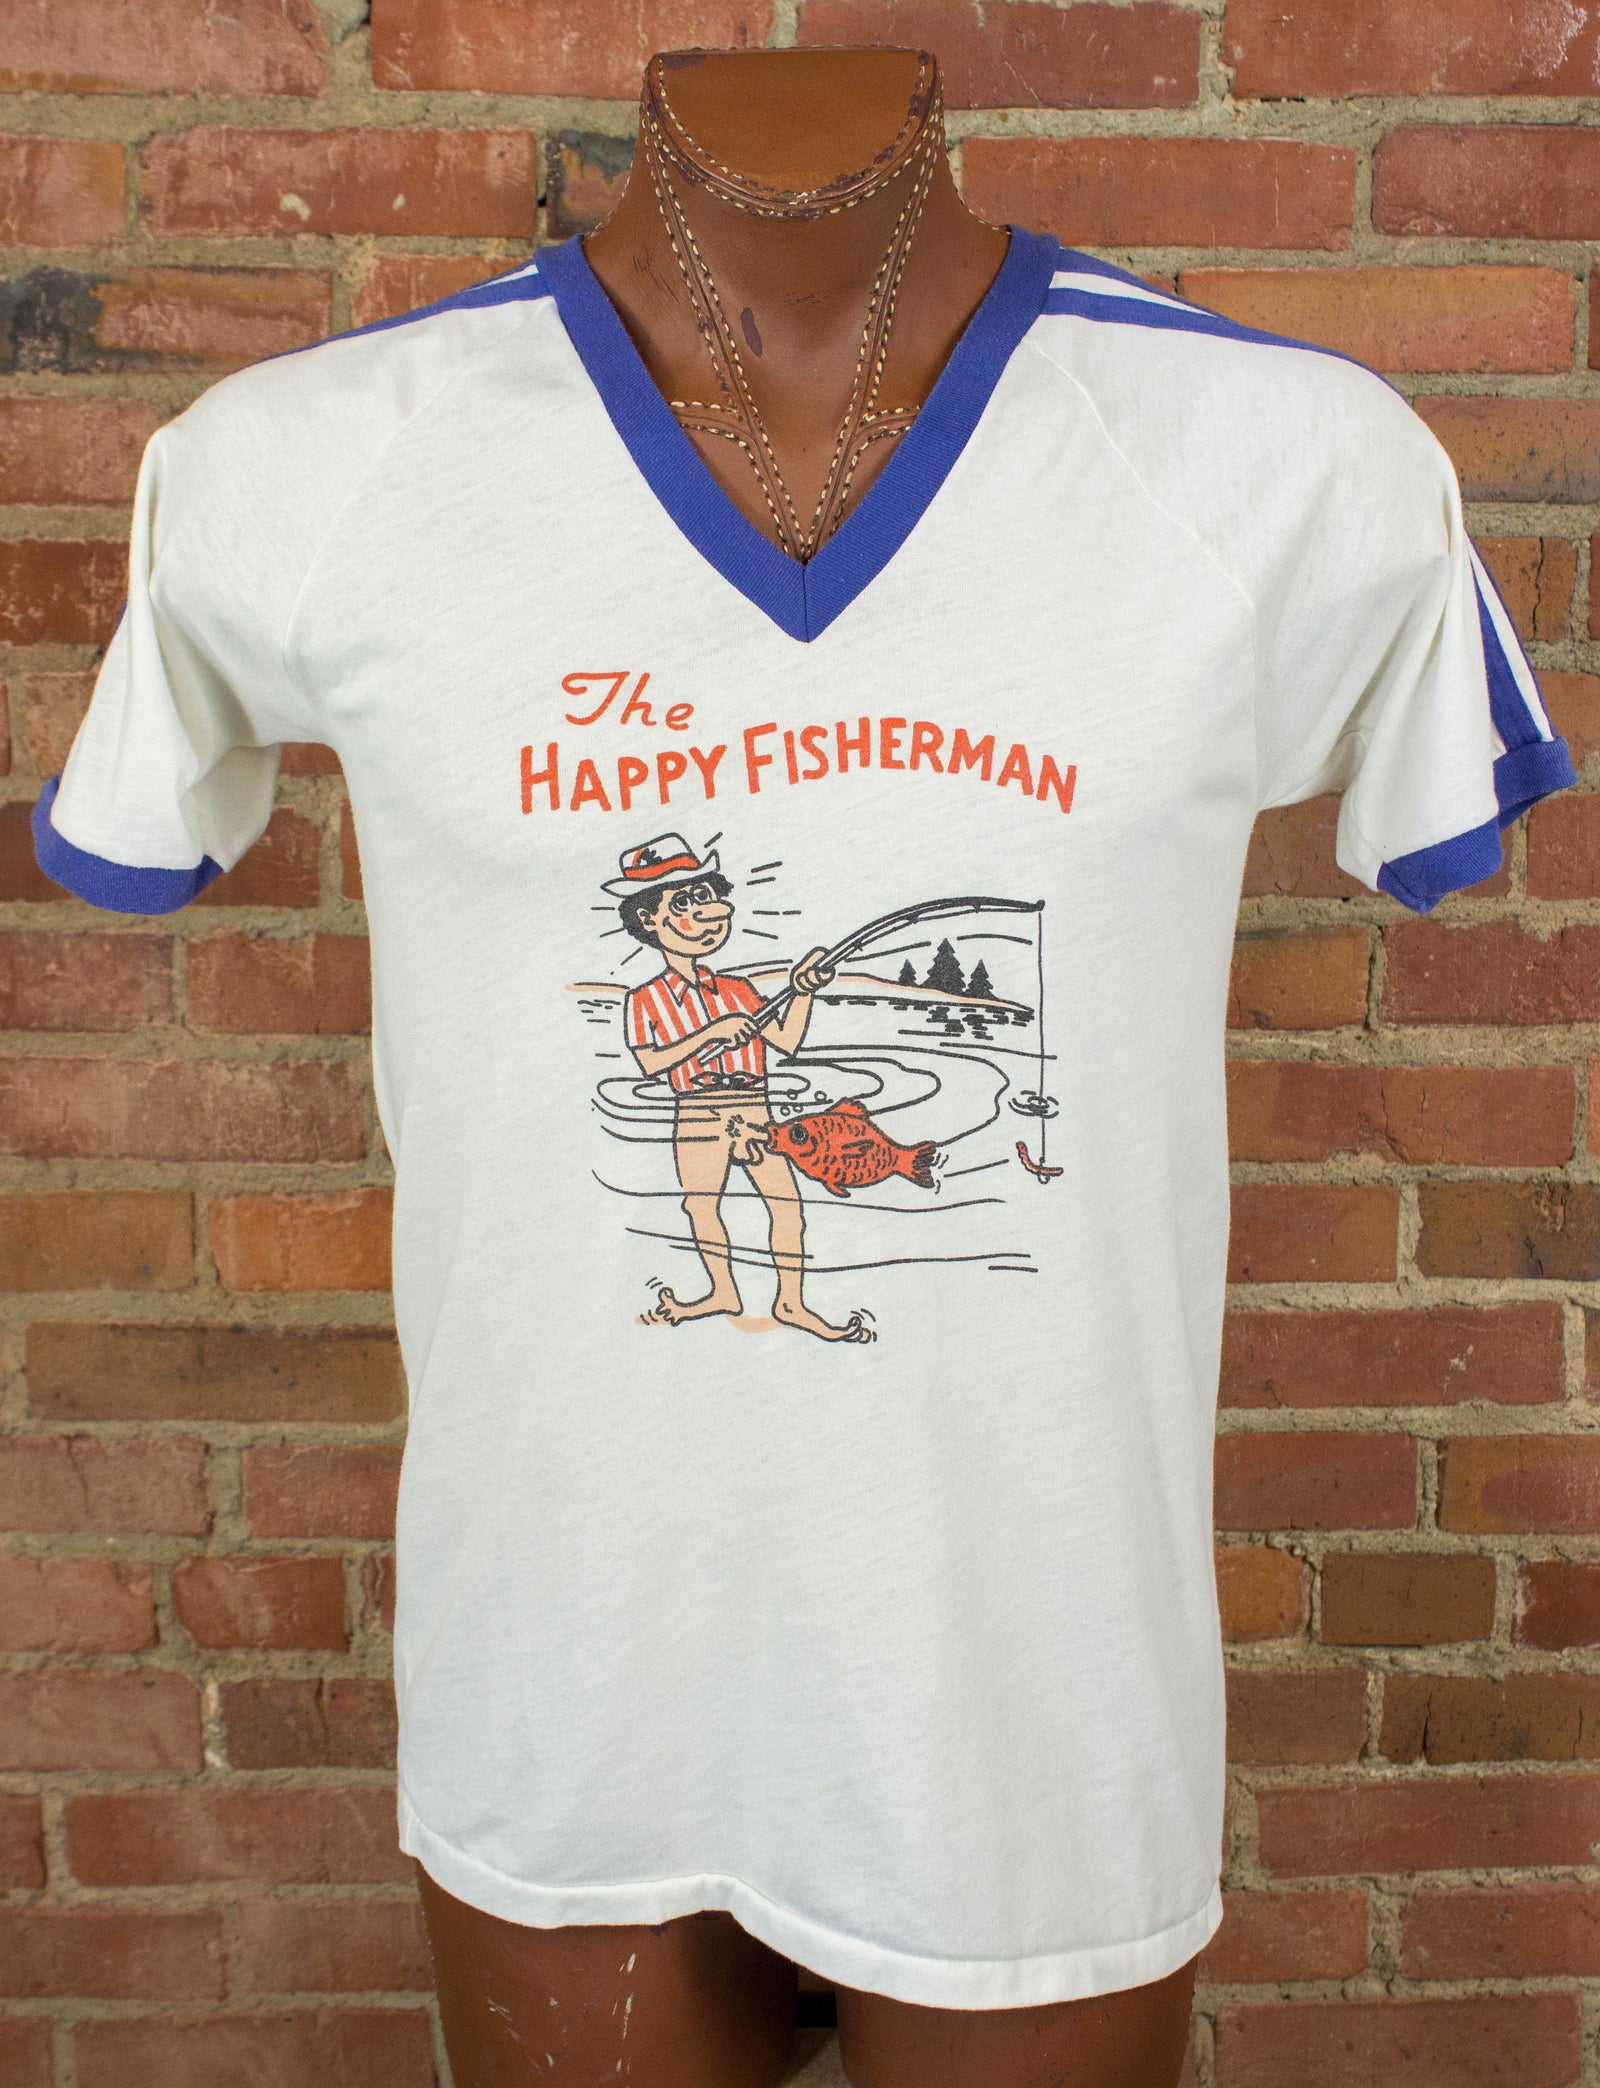 Vintage The Happy Fisherman Graphic T Shirt 70s Blue and White V-Neck Ringer Tee Medium-Large